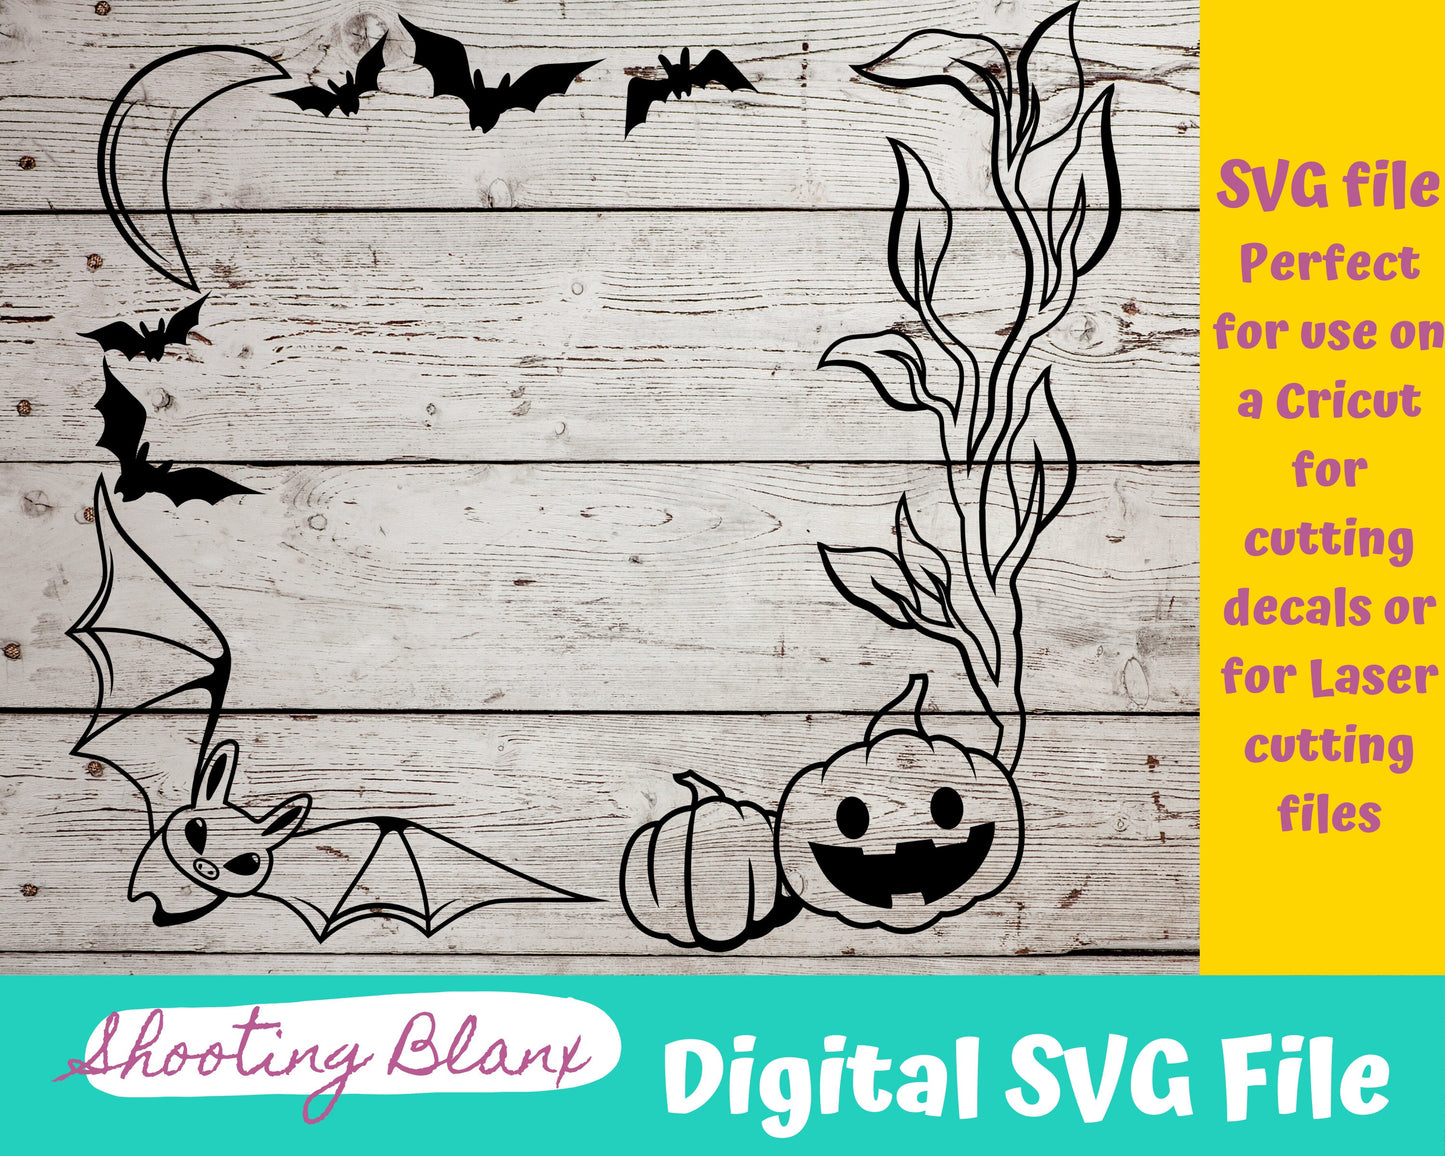 Halloween Frame bundle SVG files perfect for Cricut, Cameo, or Silhouette also for laser engraving Glowforge, horror, spooky, door wreath